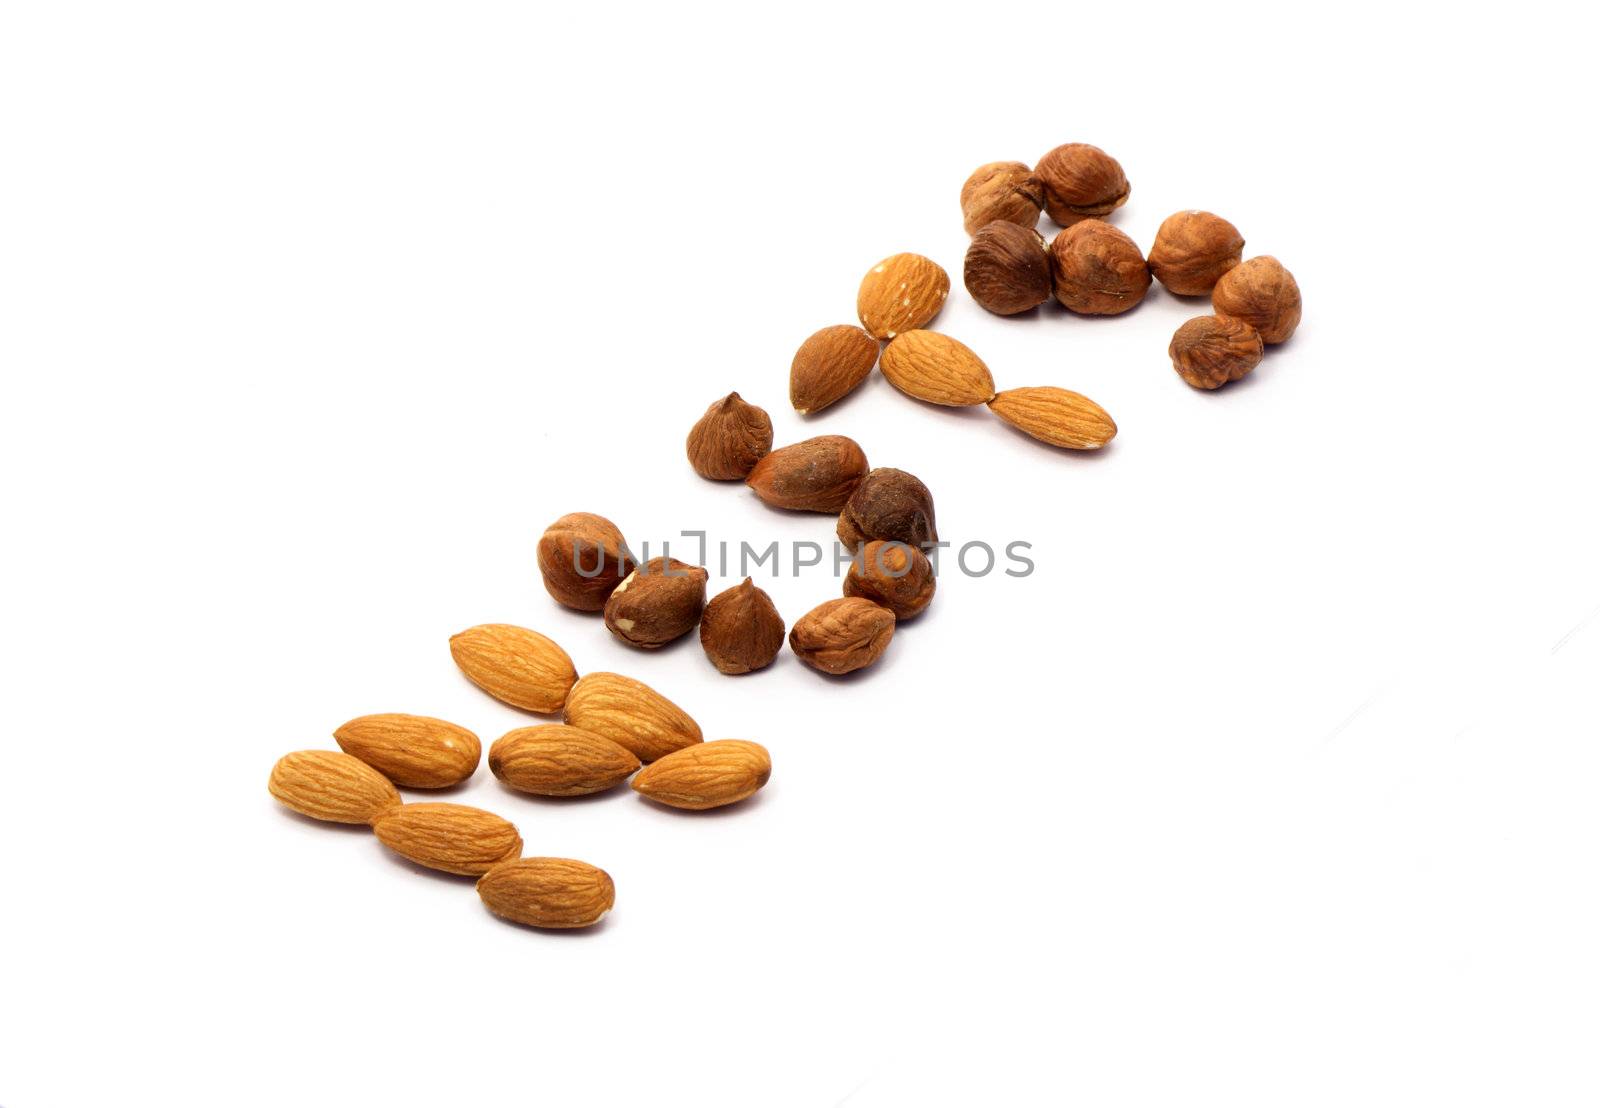 Word NUTS made from cashew and hazelnut on white background